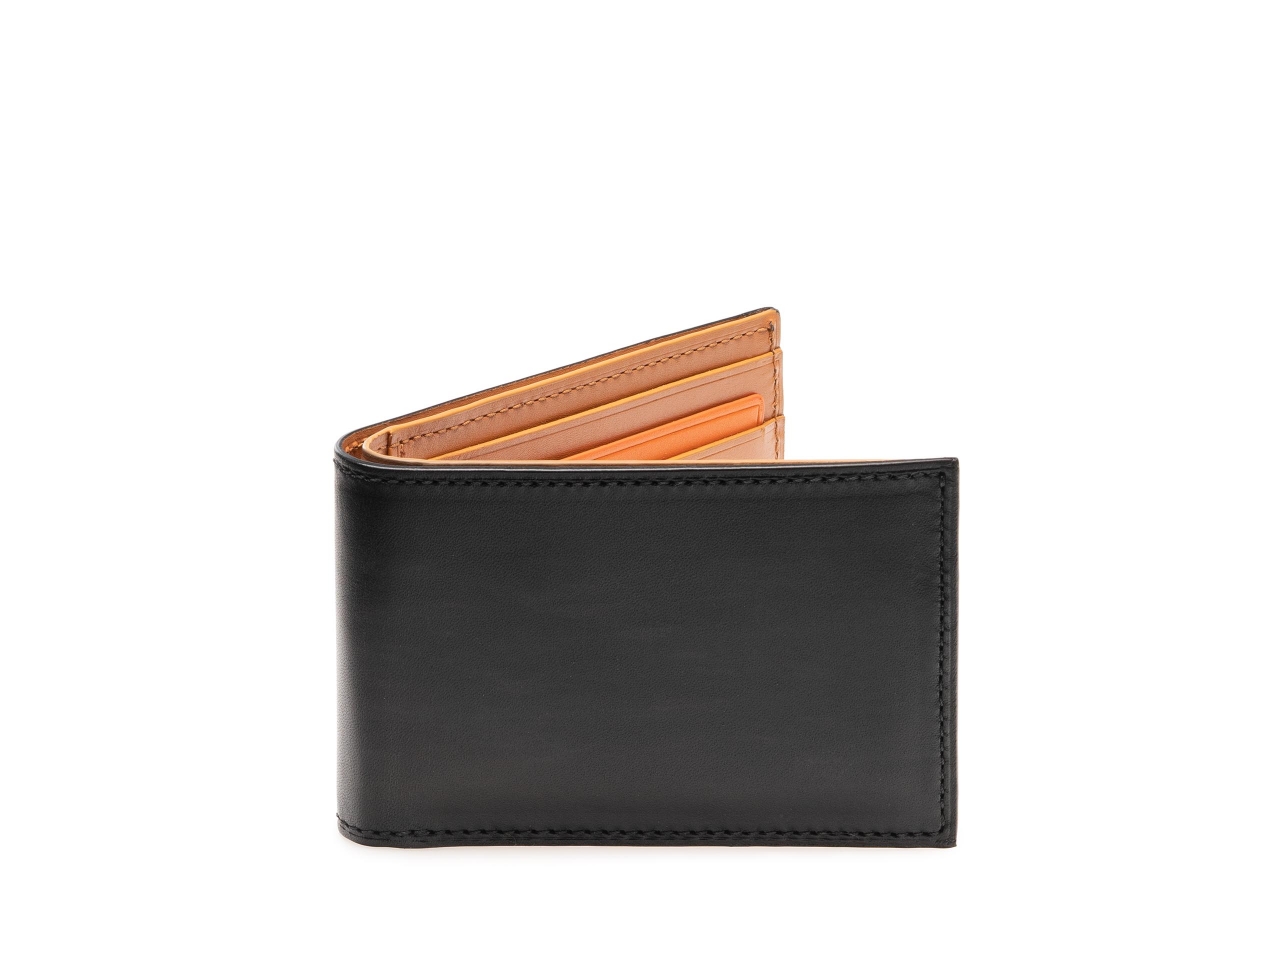 Outside of the Slim Fold Wallet